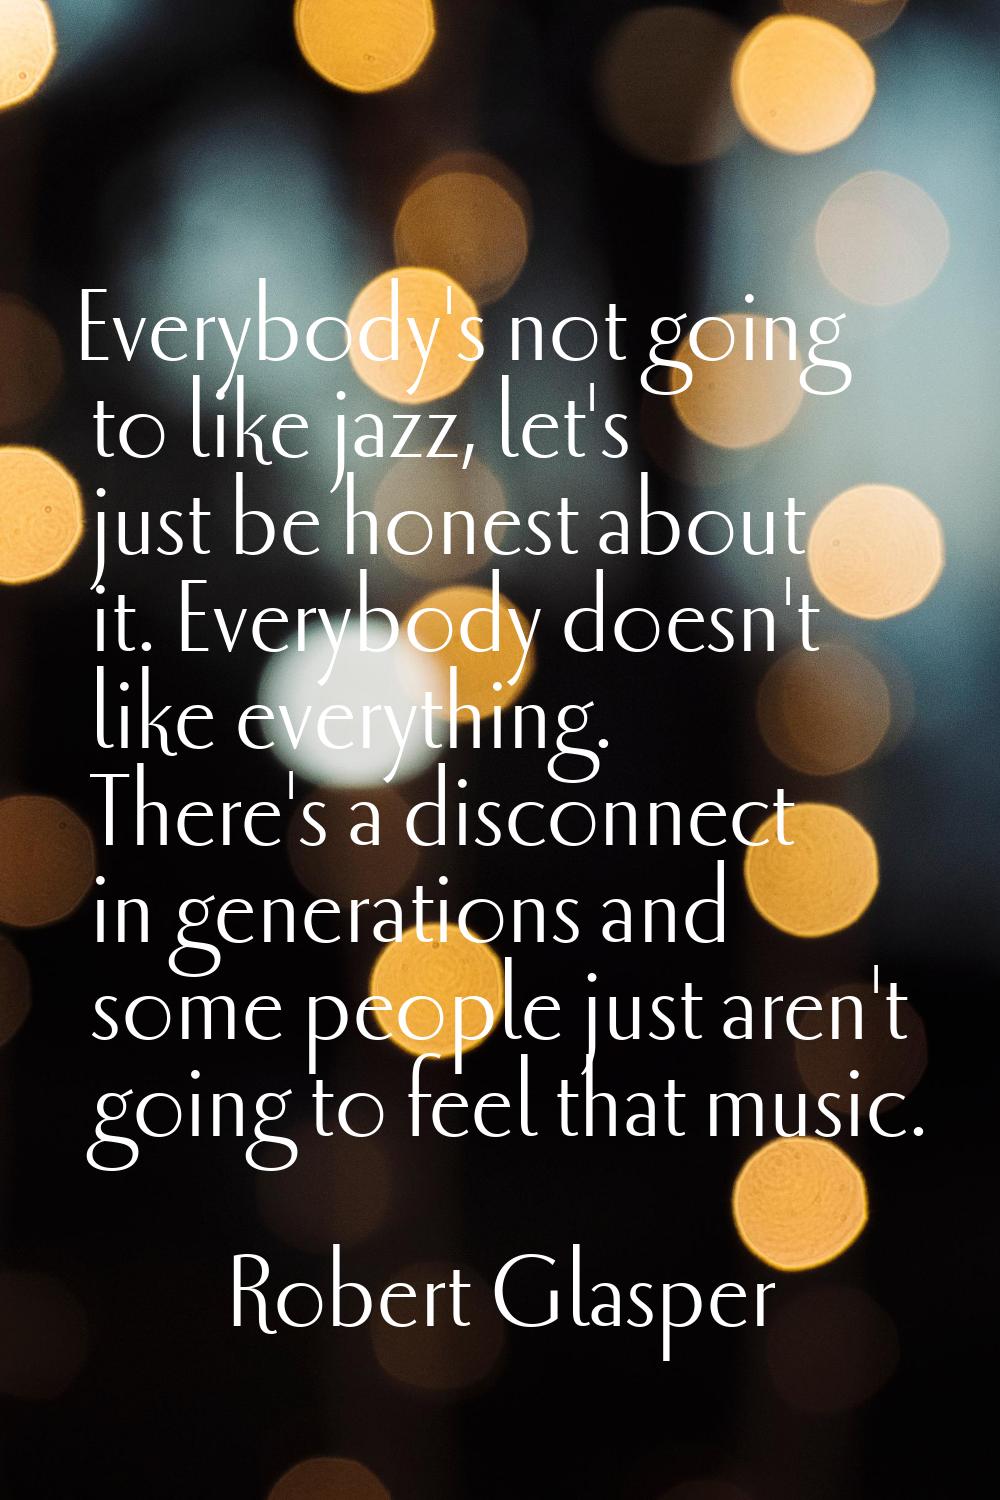 Everybody's not going to like jazz, let's just be honest about it. Everybody doesn't like everythin